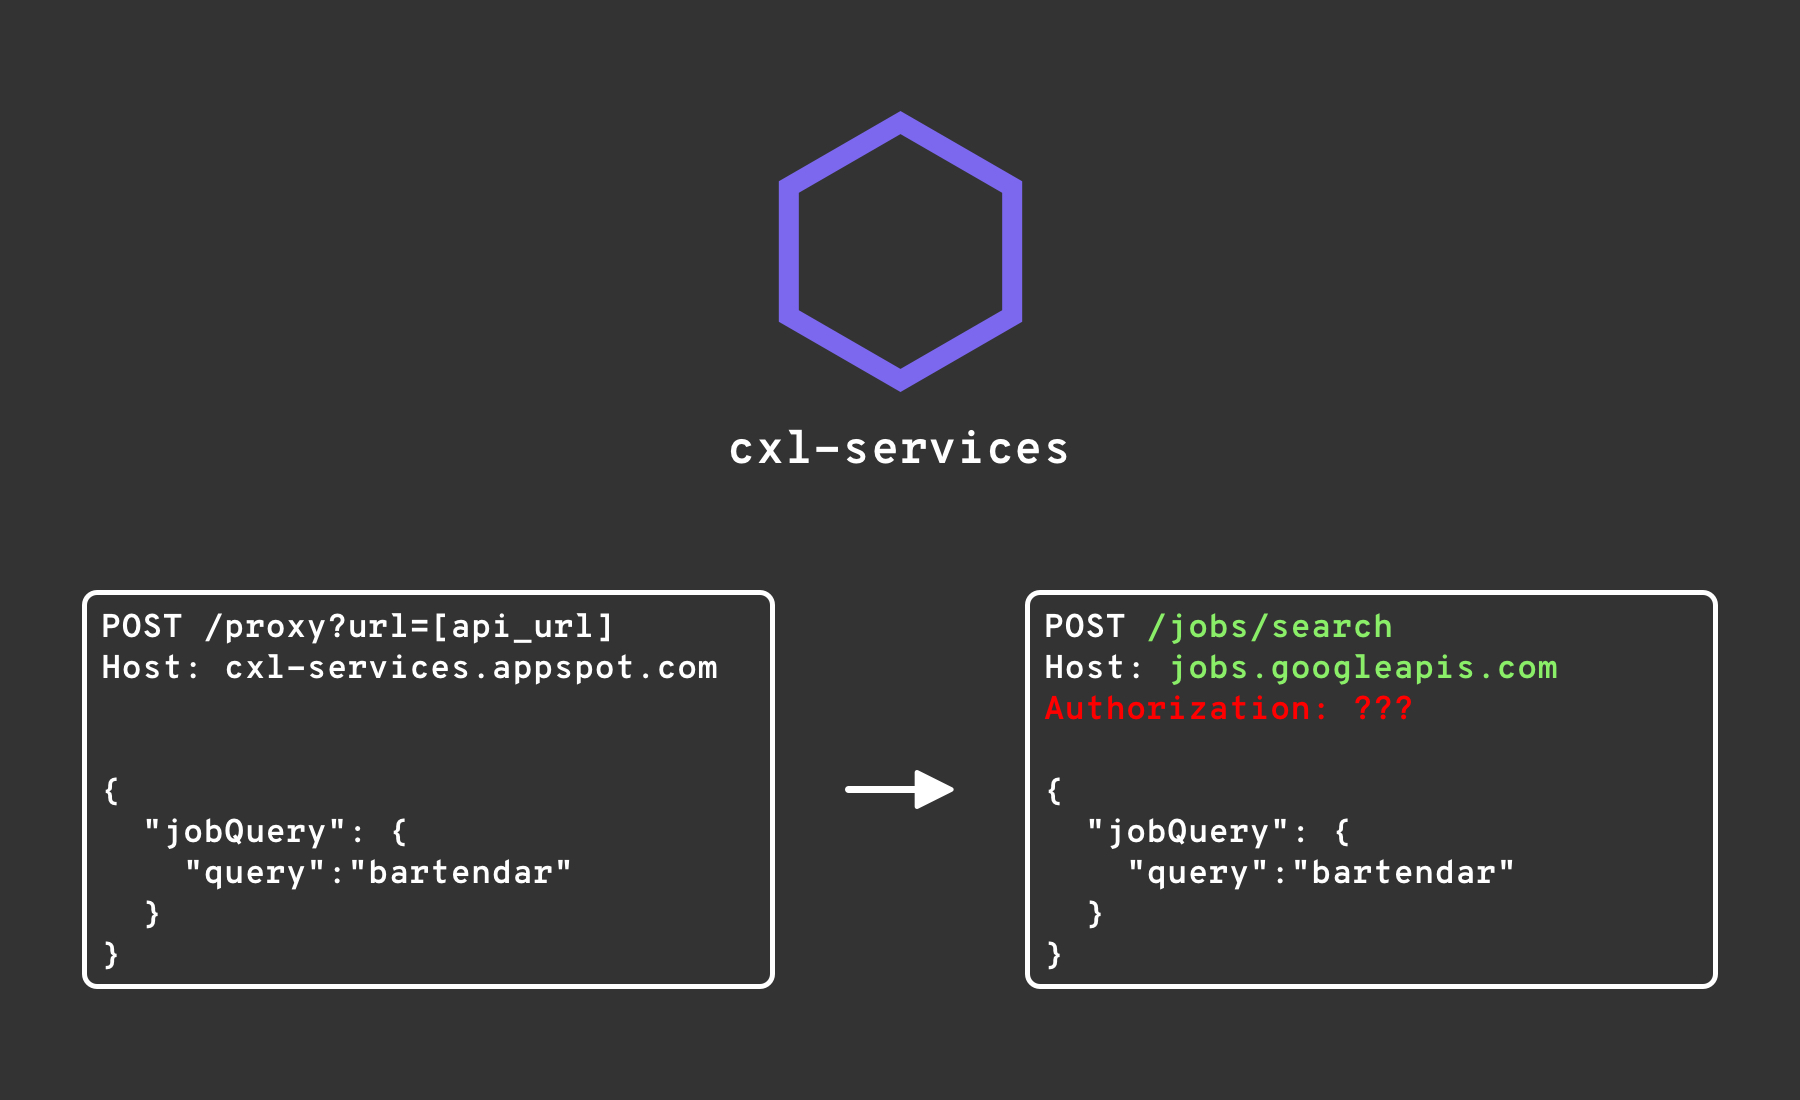 Diagram showing cxl-services adding some kind of authentication to the request